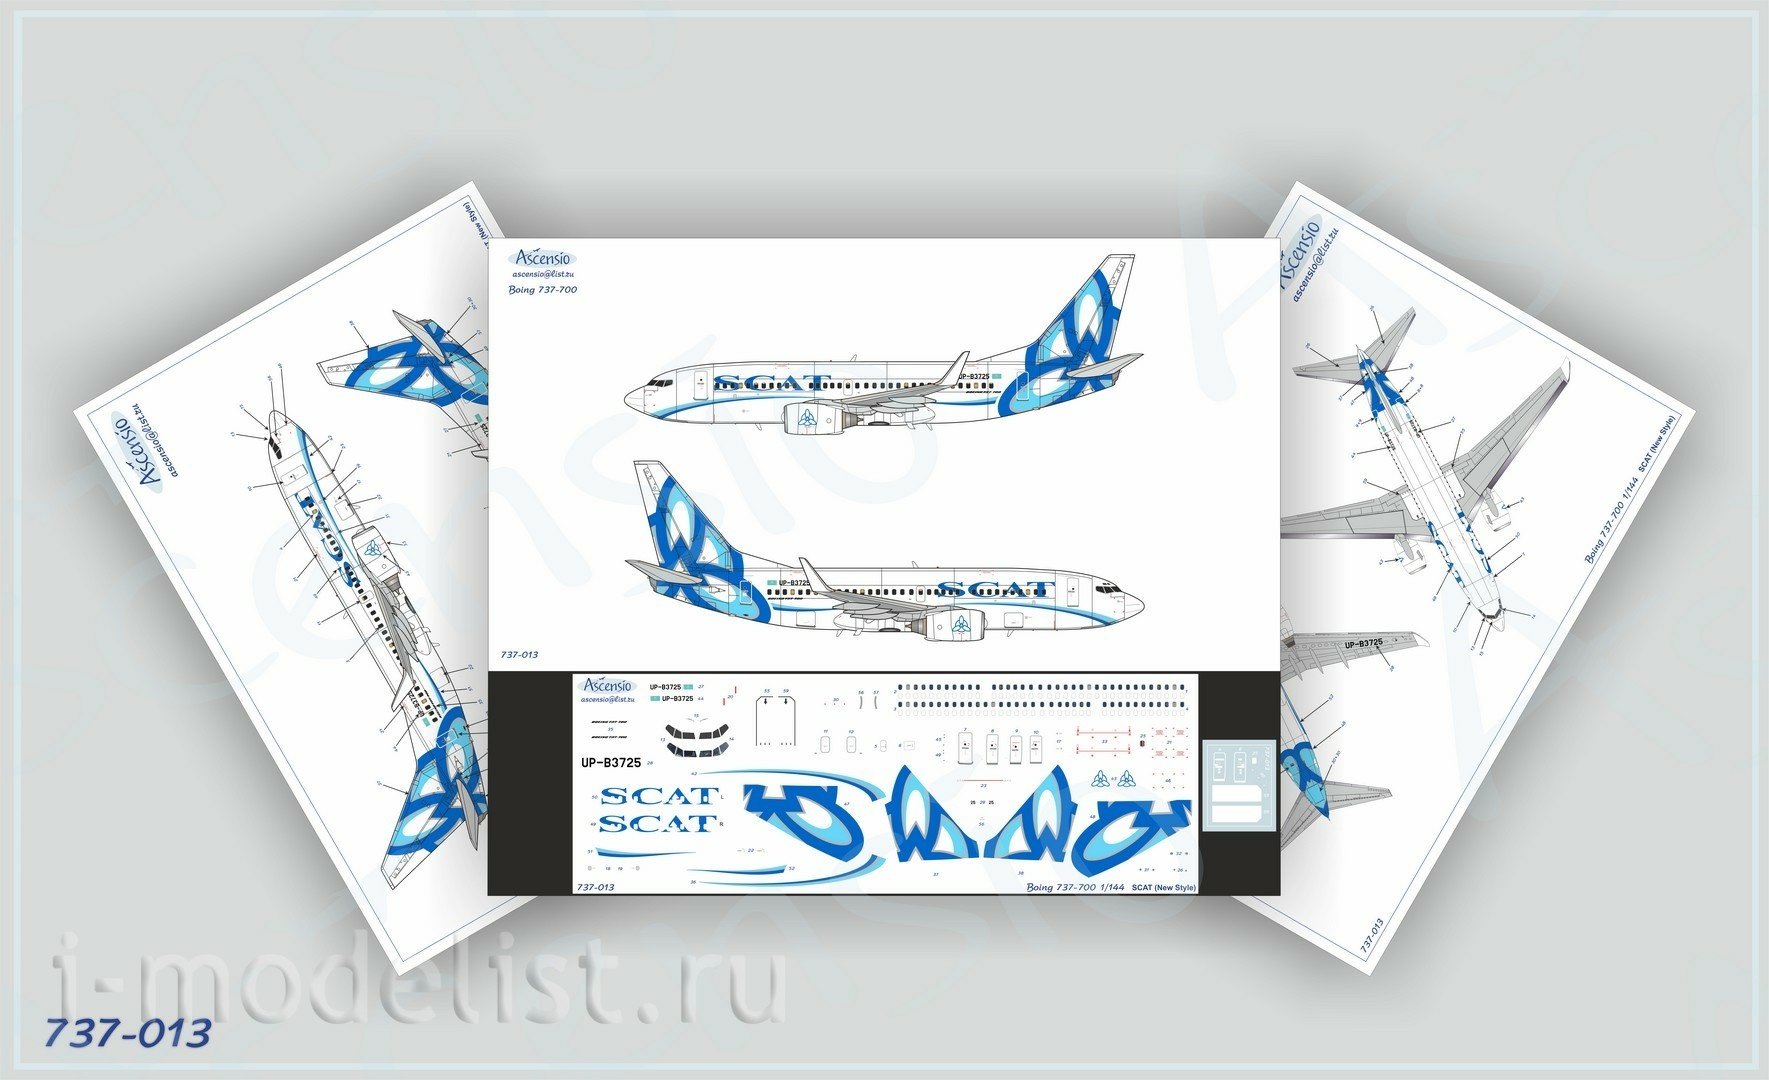 737-013 Ascensio 1/144 Scales the Decal on the plane Boeng 737-700 SCAT (New Style)